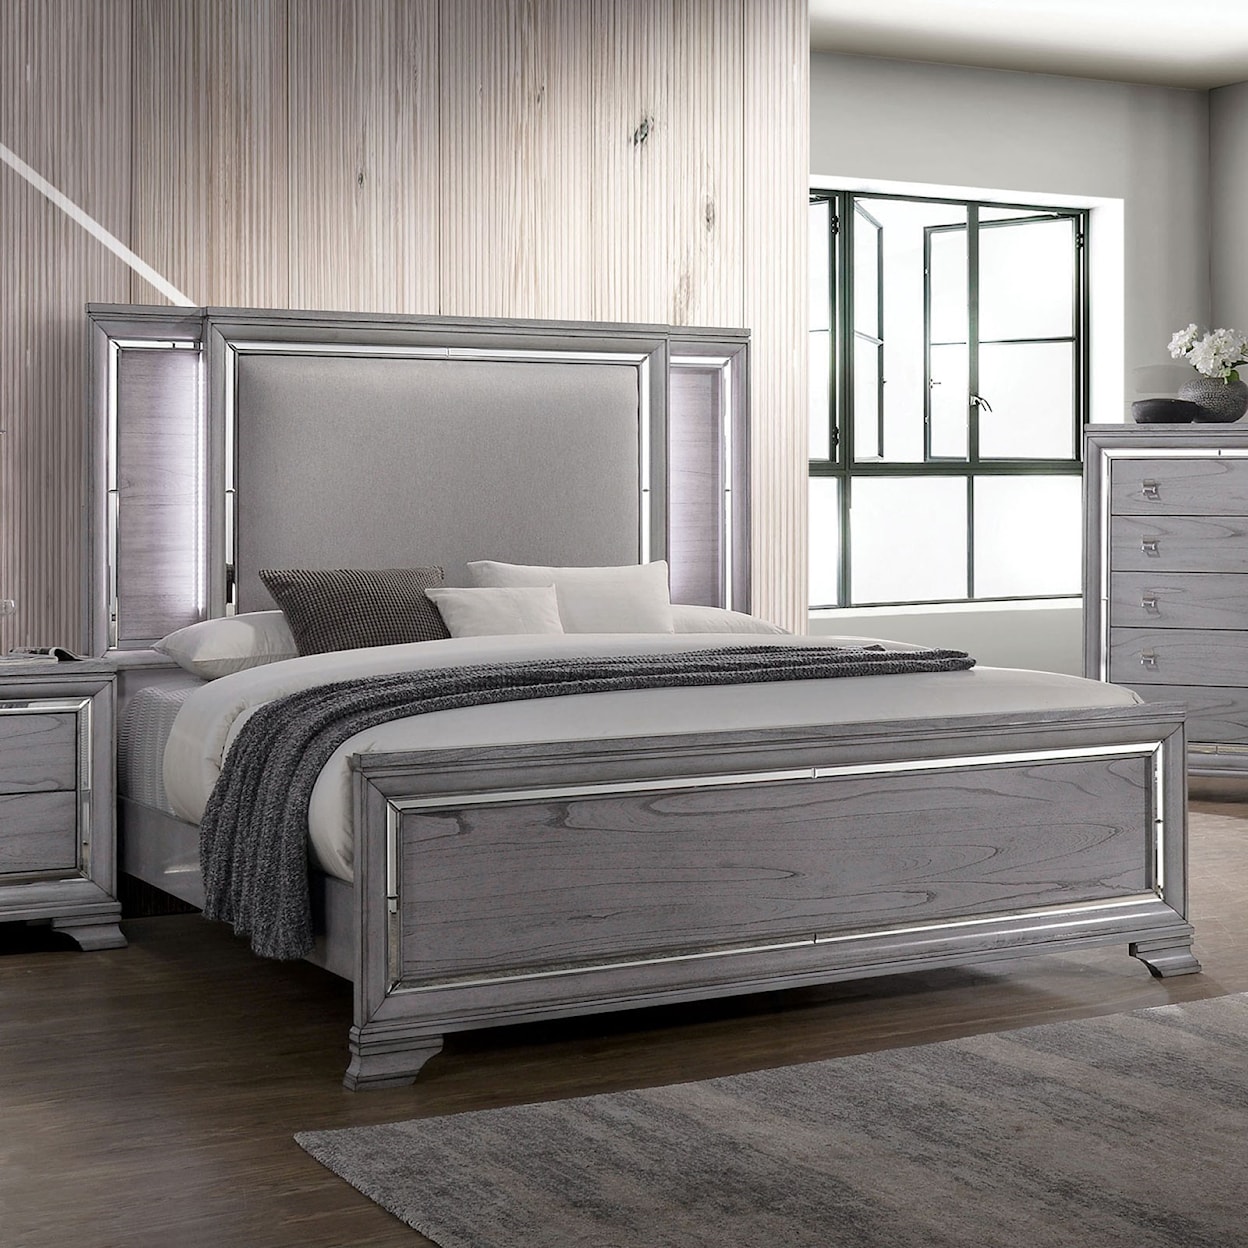 Furniture of America - FOA Alanis King Upholstered Bed